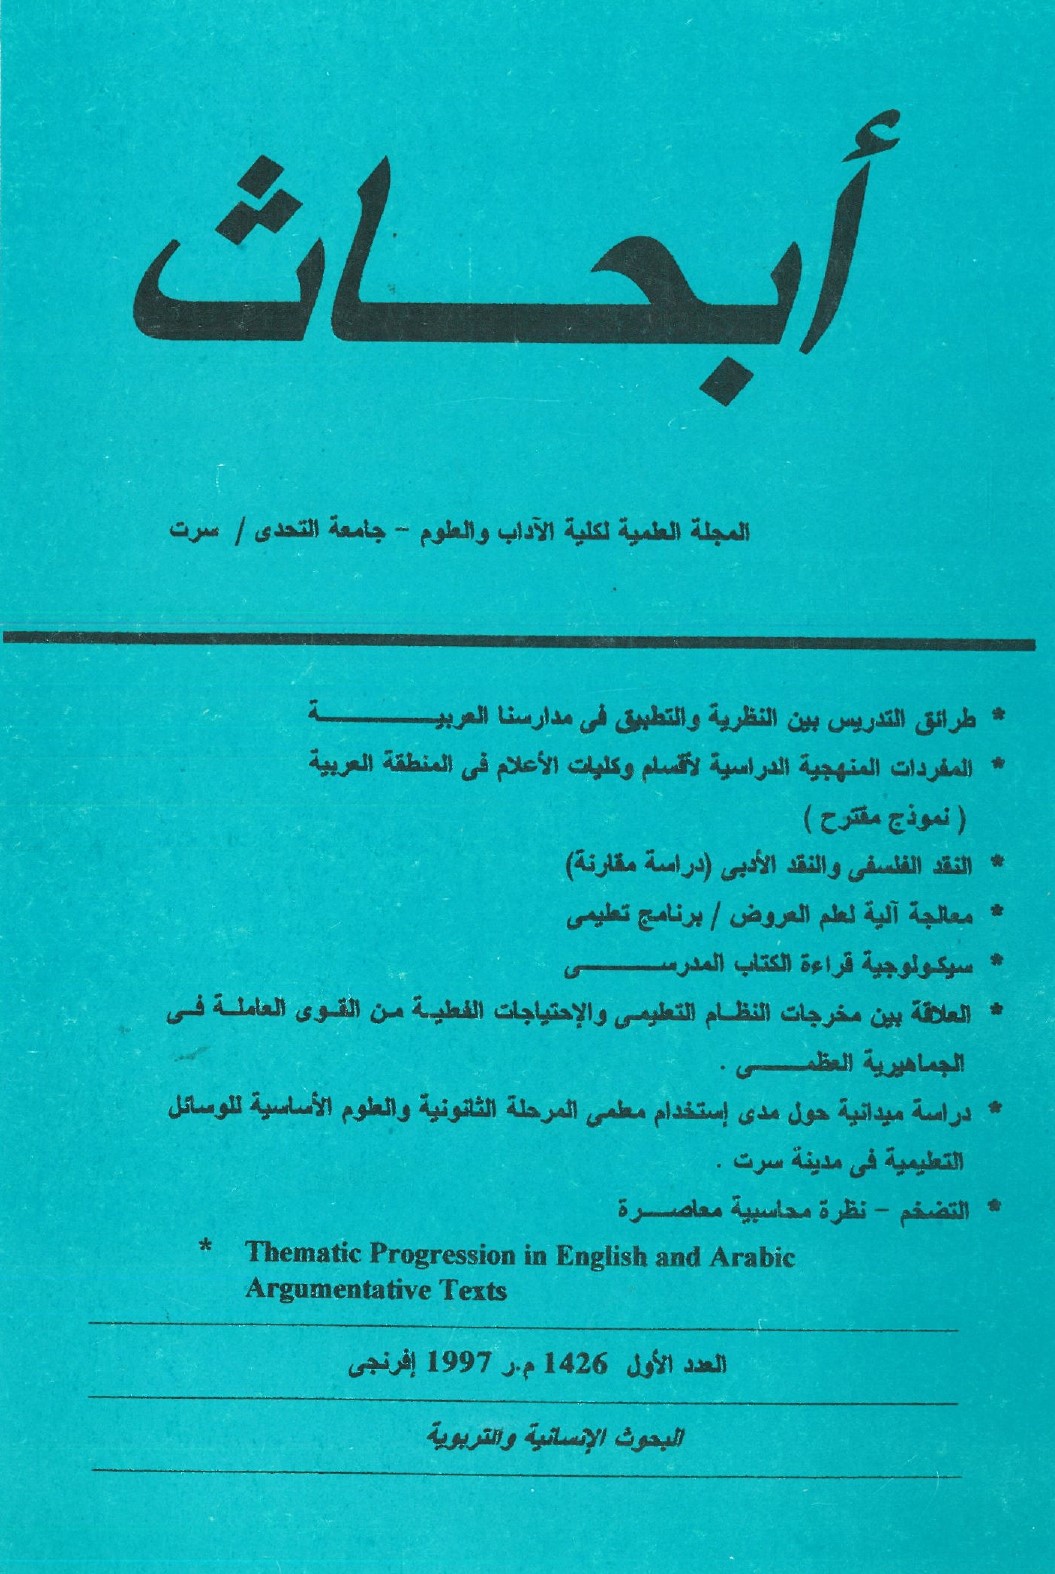 					View No. 1 (1997): Issue No. 1, 1997
				